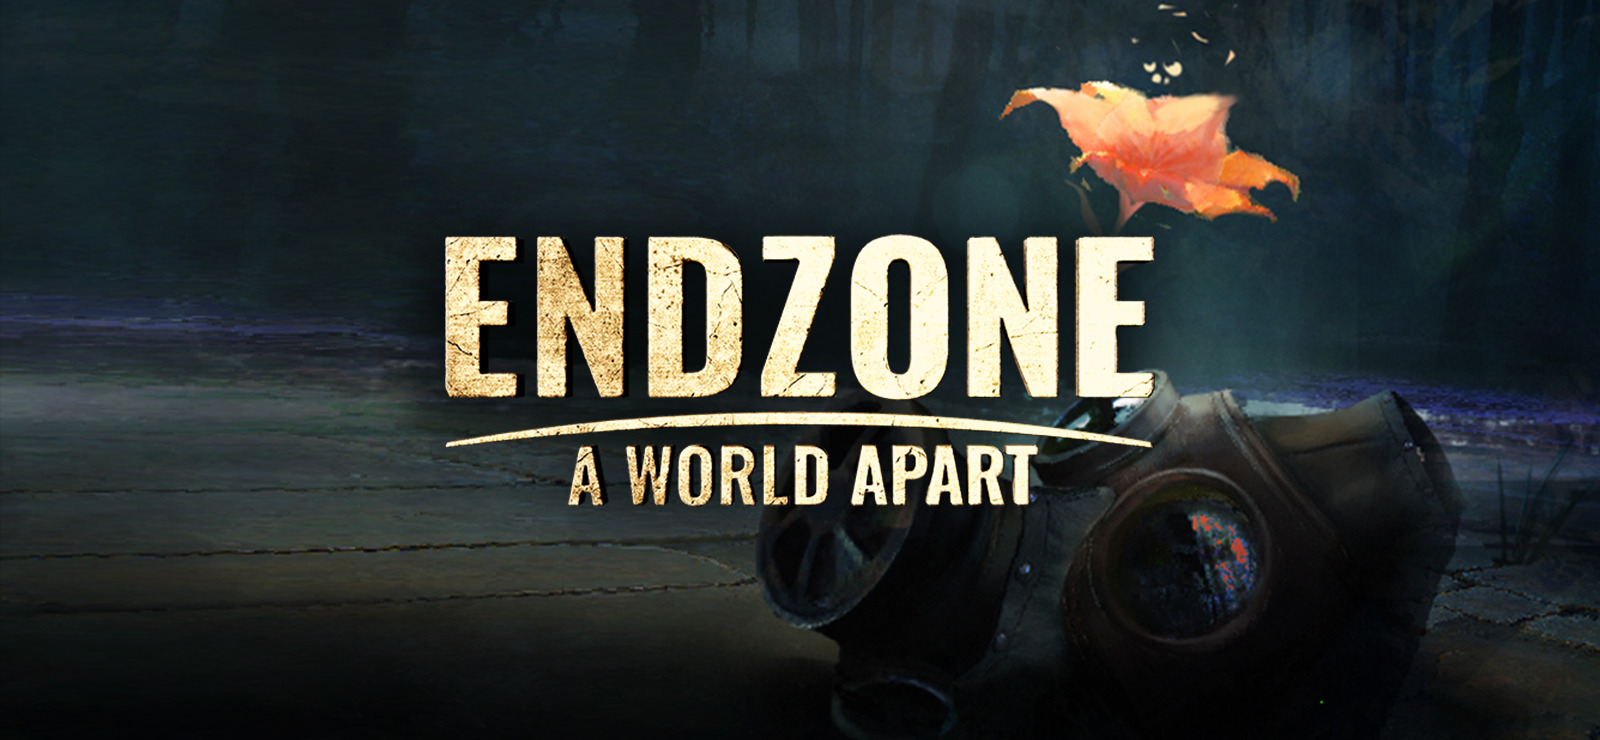 Download Endzone A World Apart Save the World Edition v1.2.8242